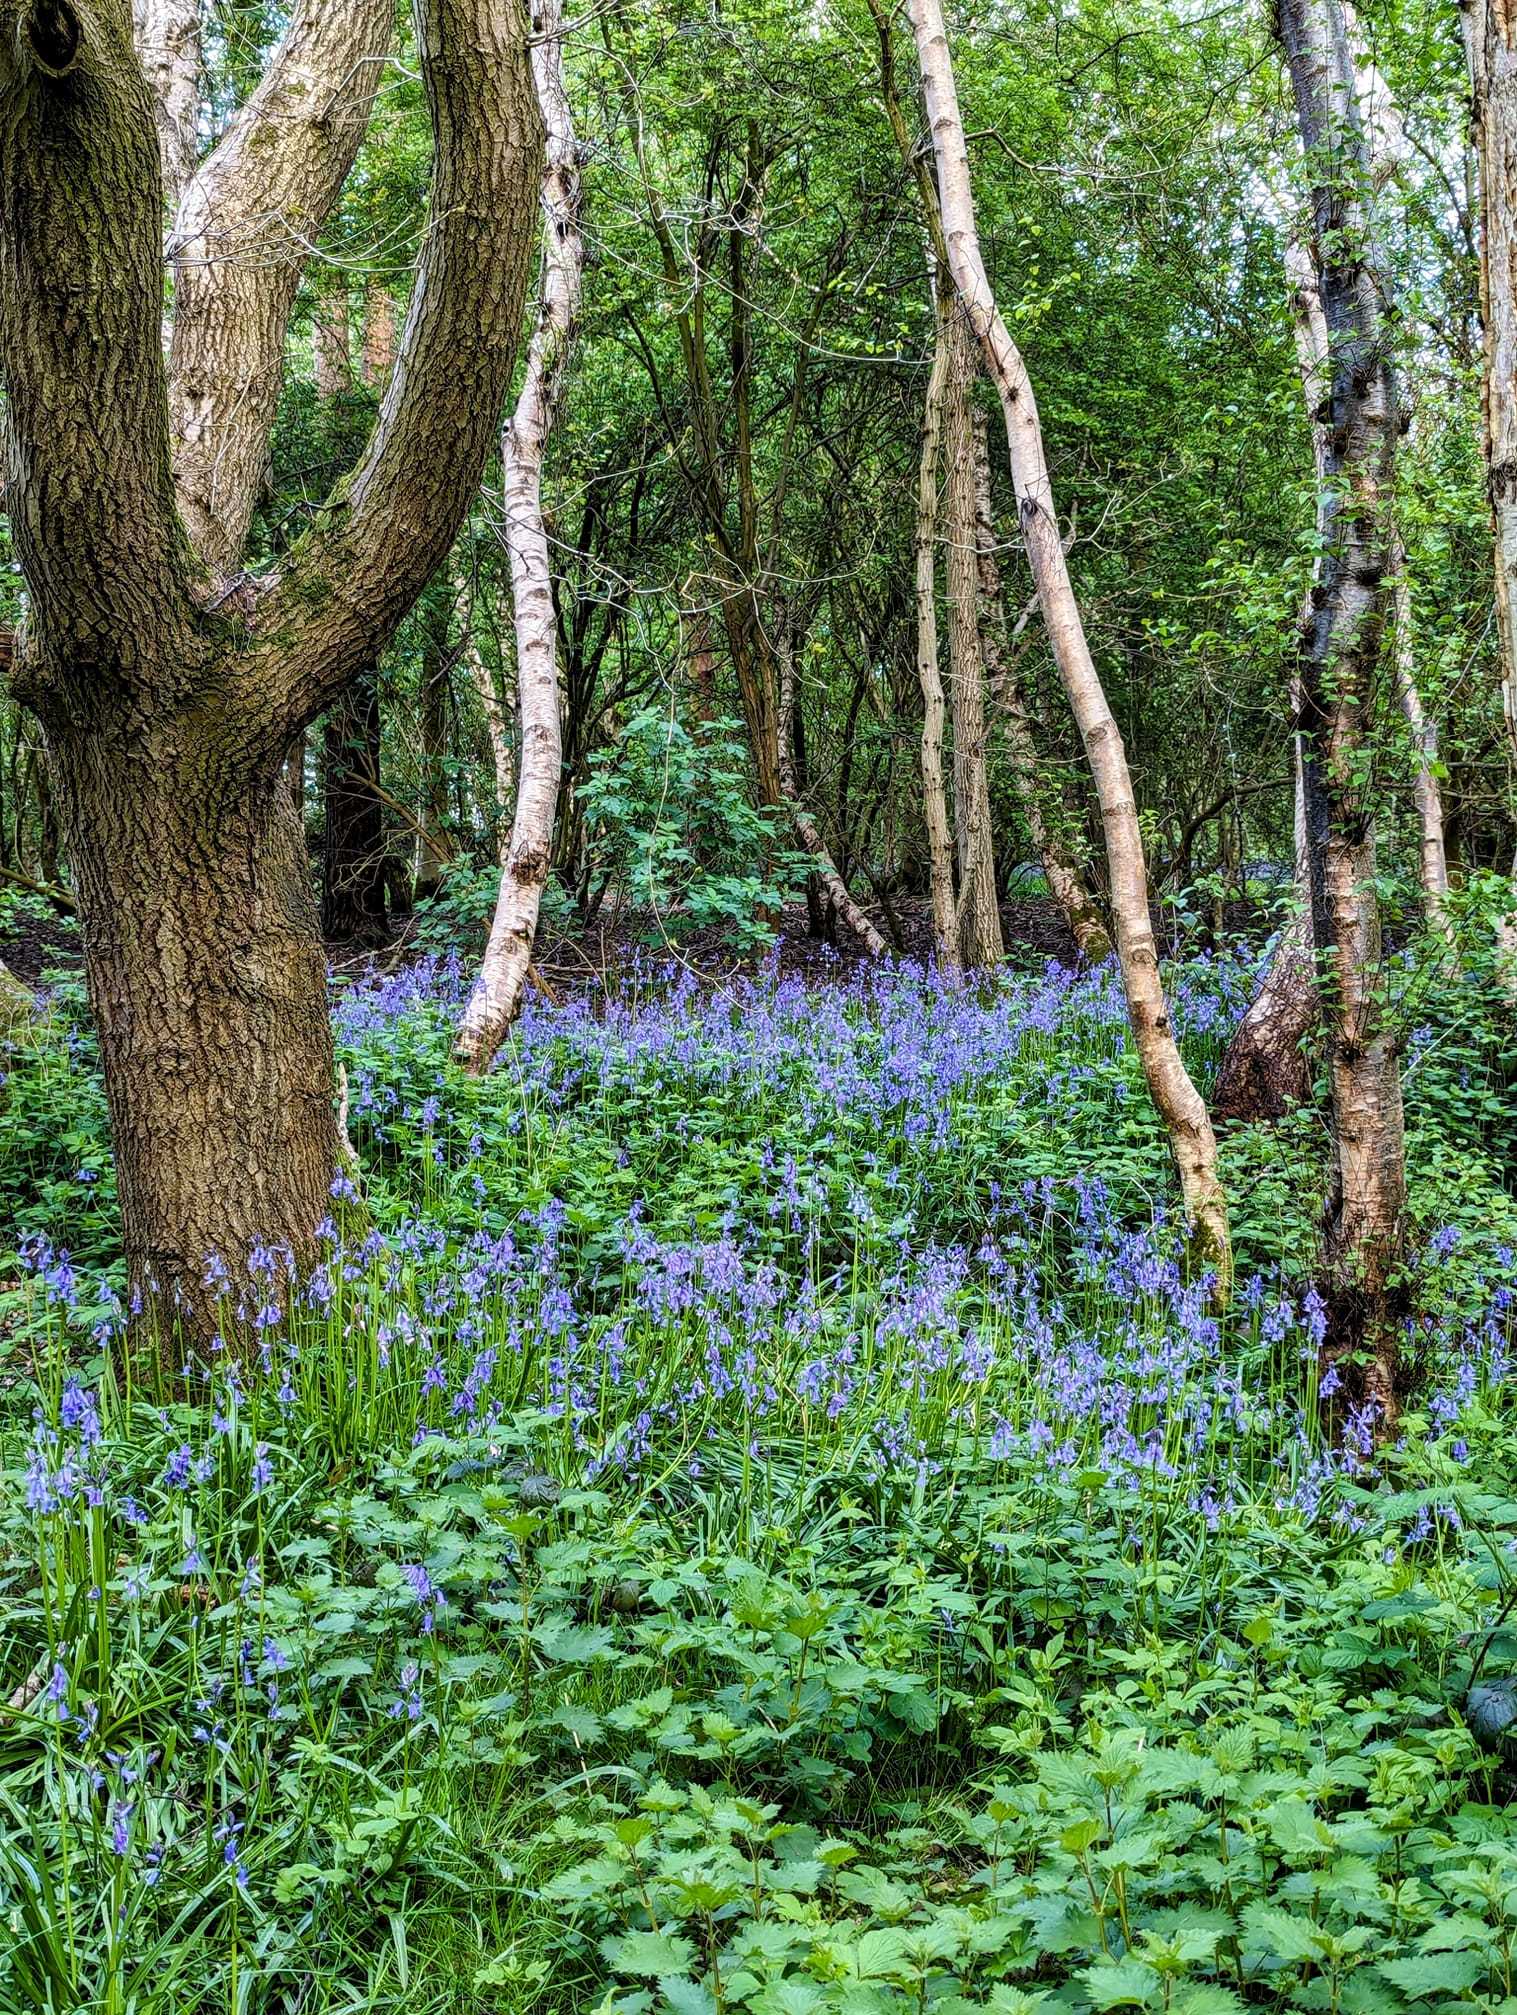 Bluebells on the common in Winsford by Lisa Lacking